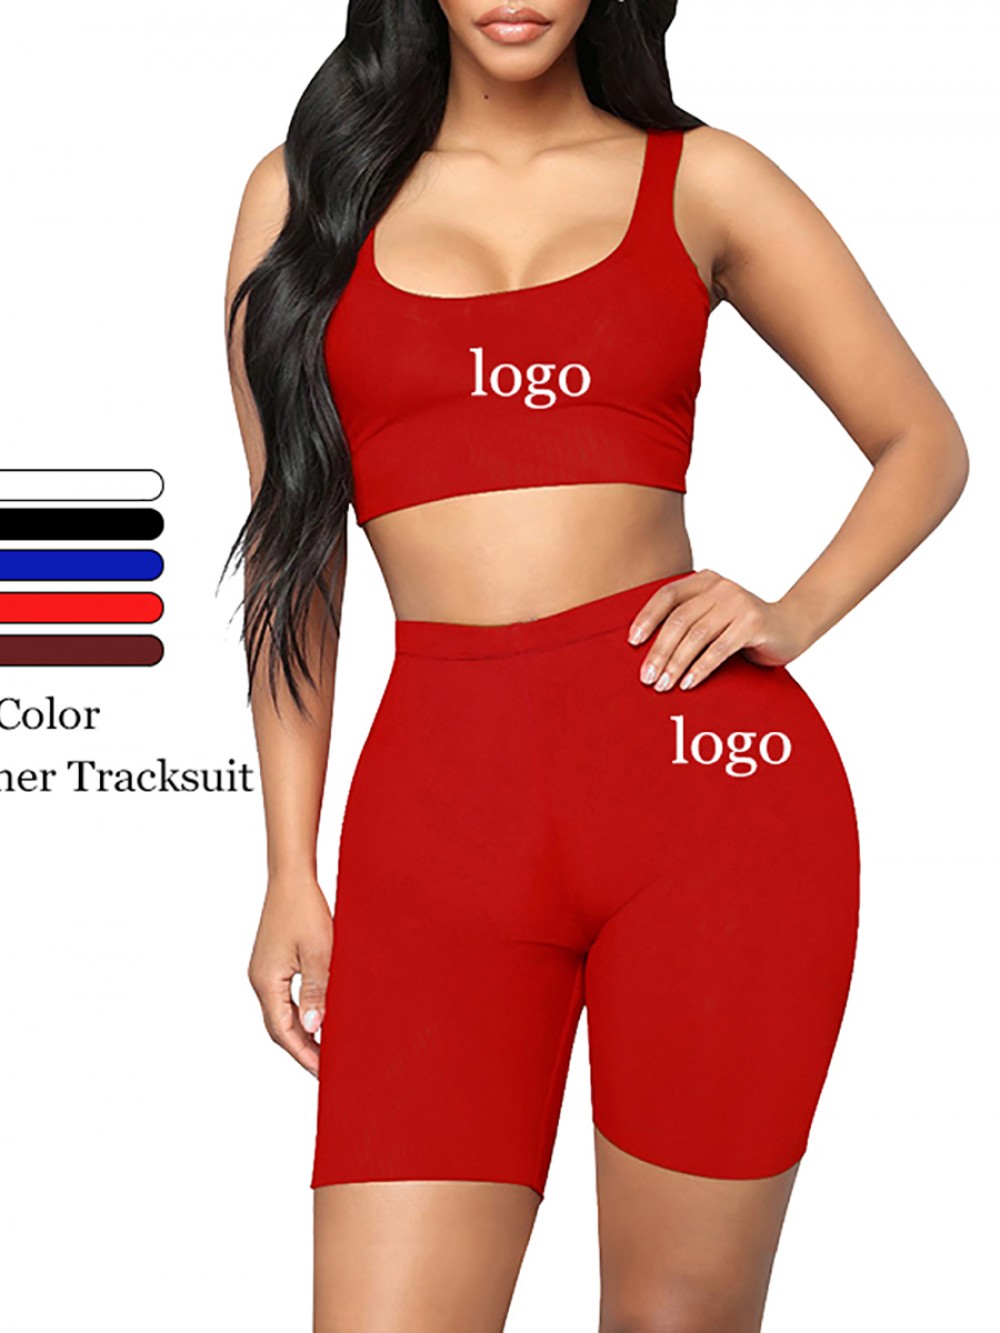 Breathable Red Sleeveless Top High Rise Sports Shorts Feminine